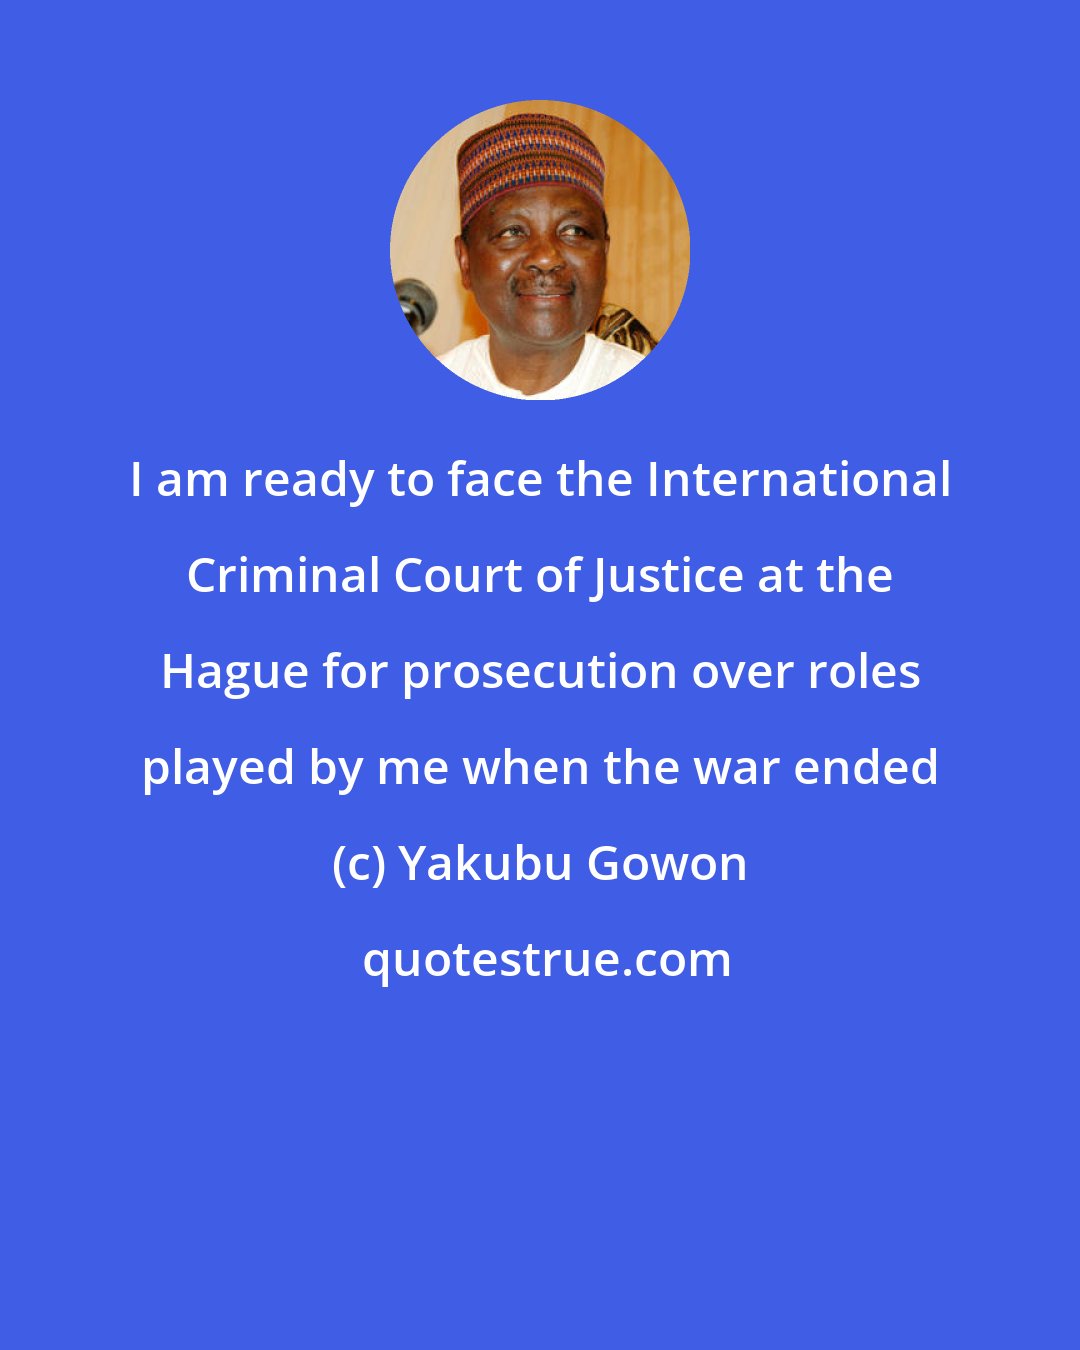 Yakubu Gowon: I am ready to face the International Criminal Court of Justice at the Hague for prosecution over roles played by me when the war ended